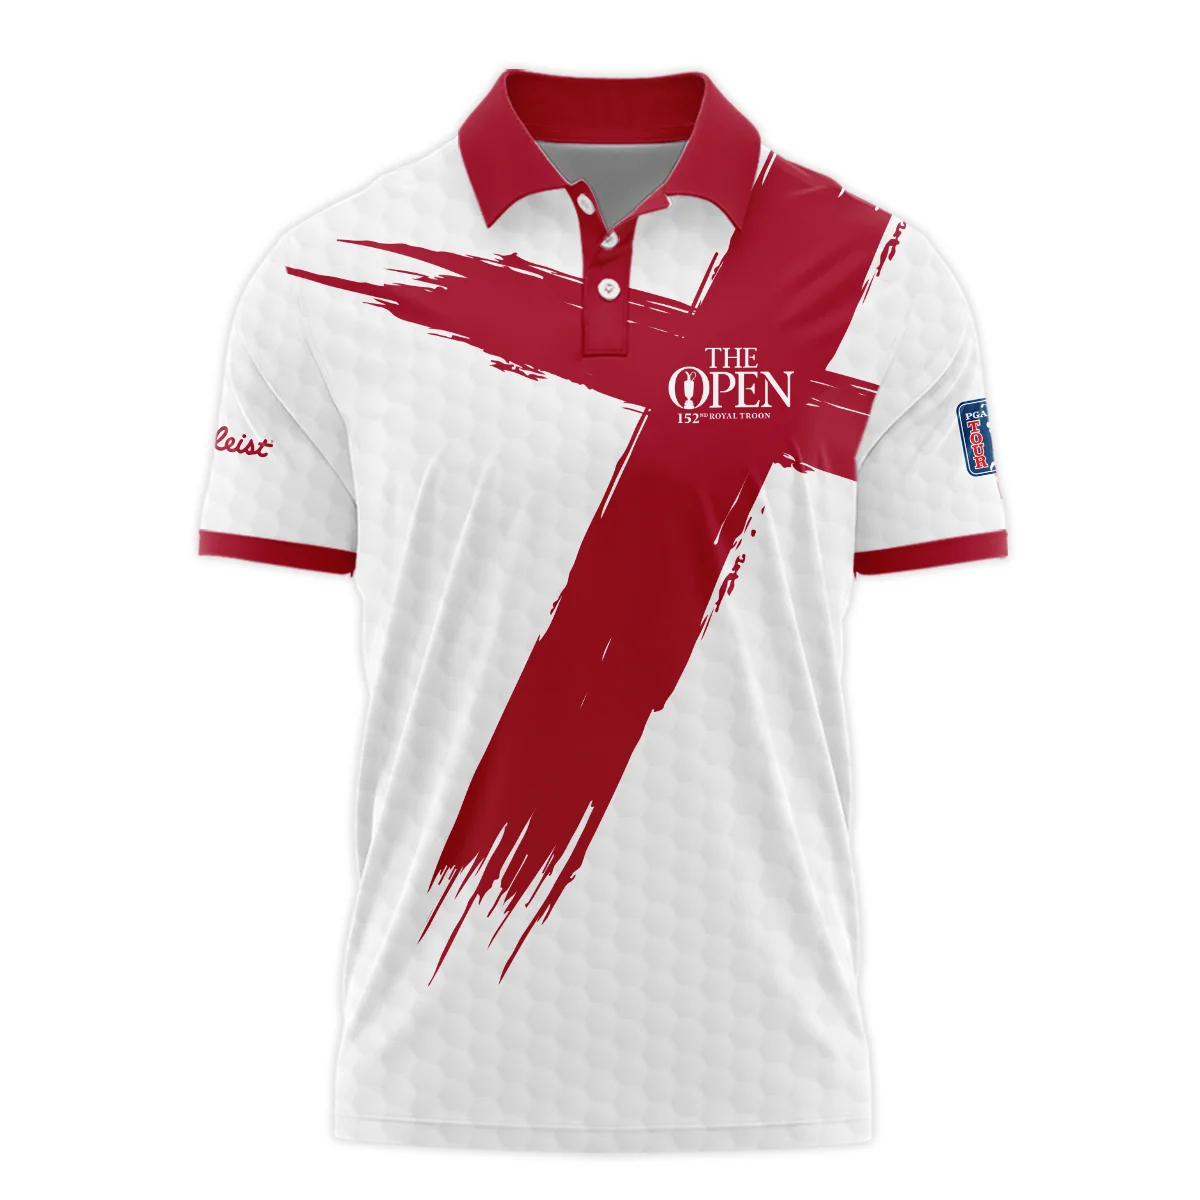 Titleist 152nd The Open Championship Golf Sport Polo Shirt Red White Golf Pattern All Over Print Polo Shirt For Men